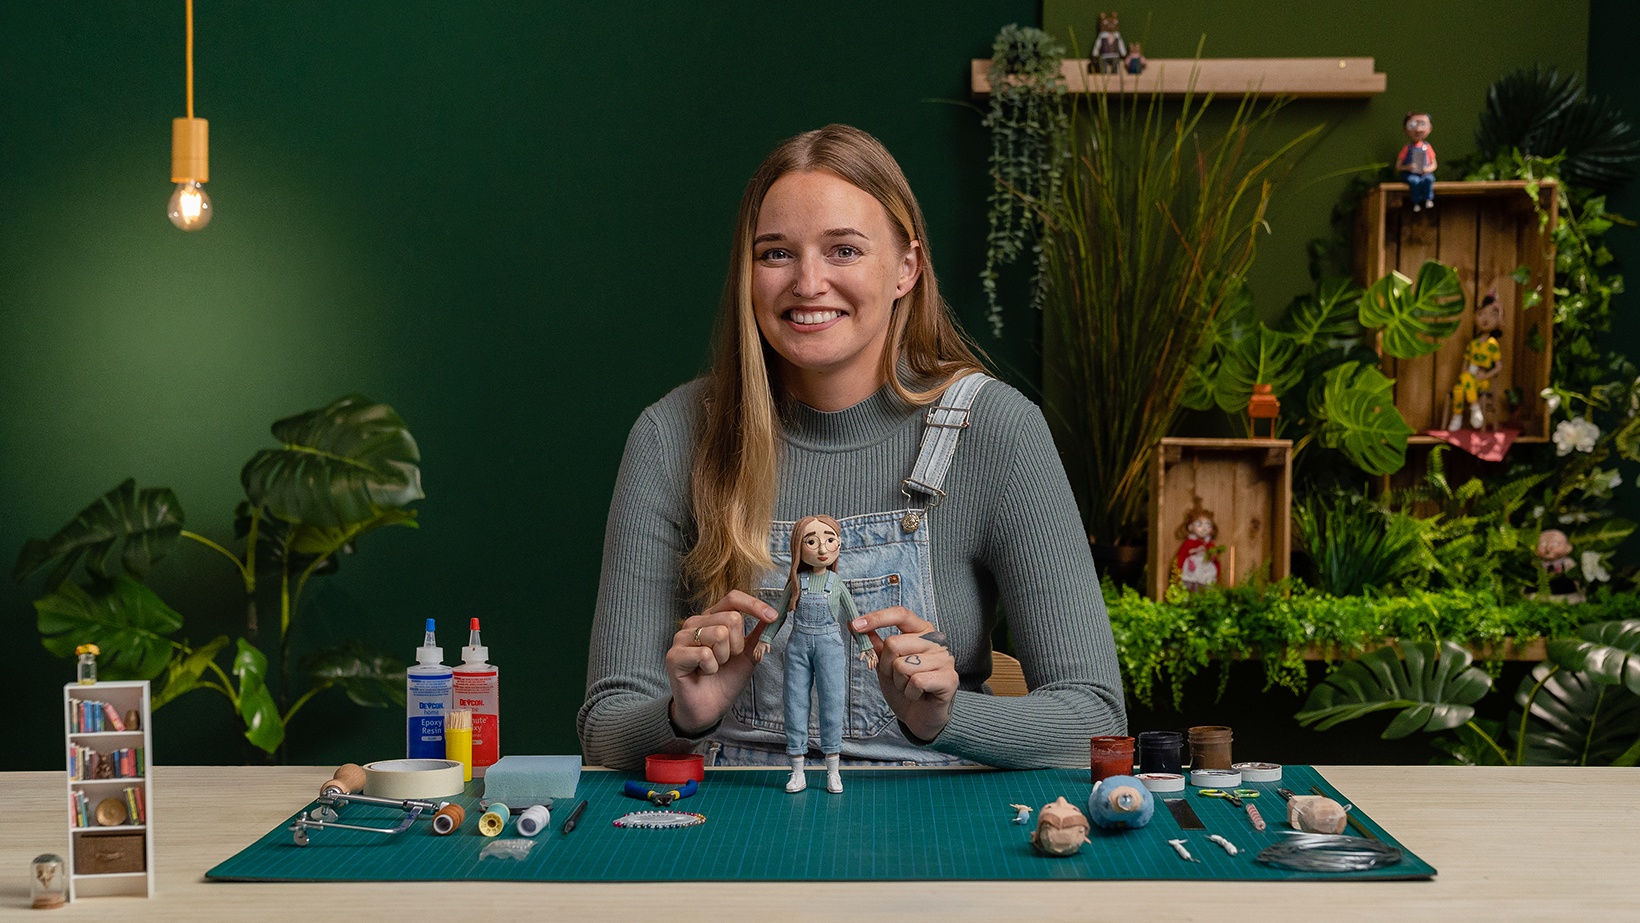 Online Course - Introduction to Puppet Making for Stop Motion